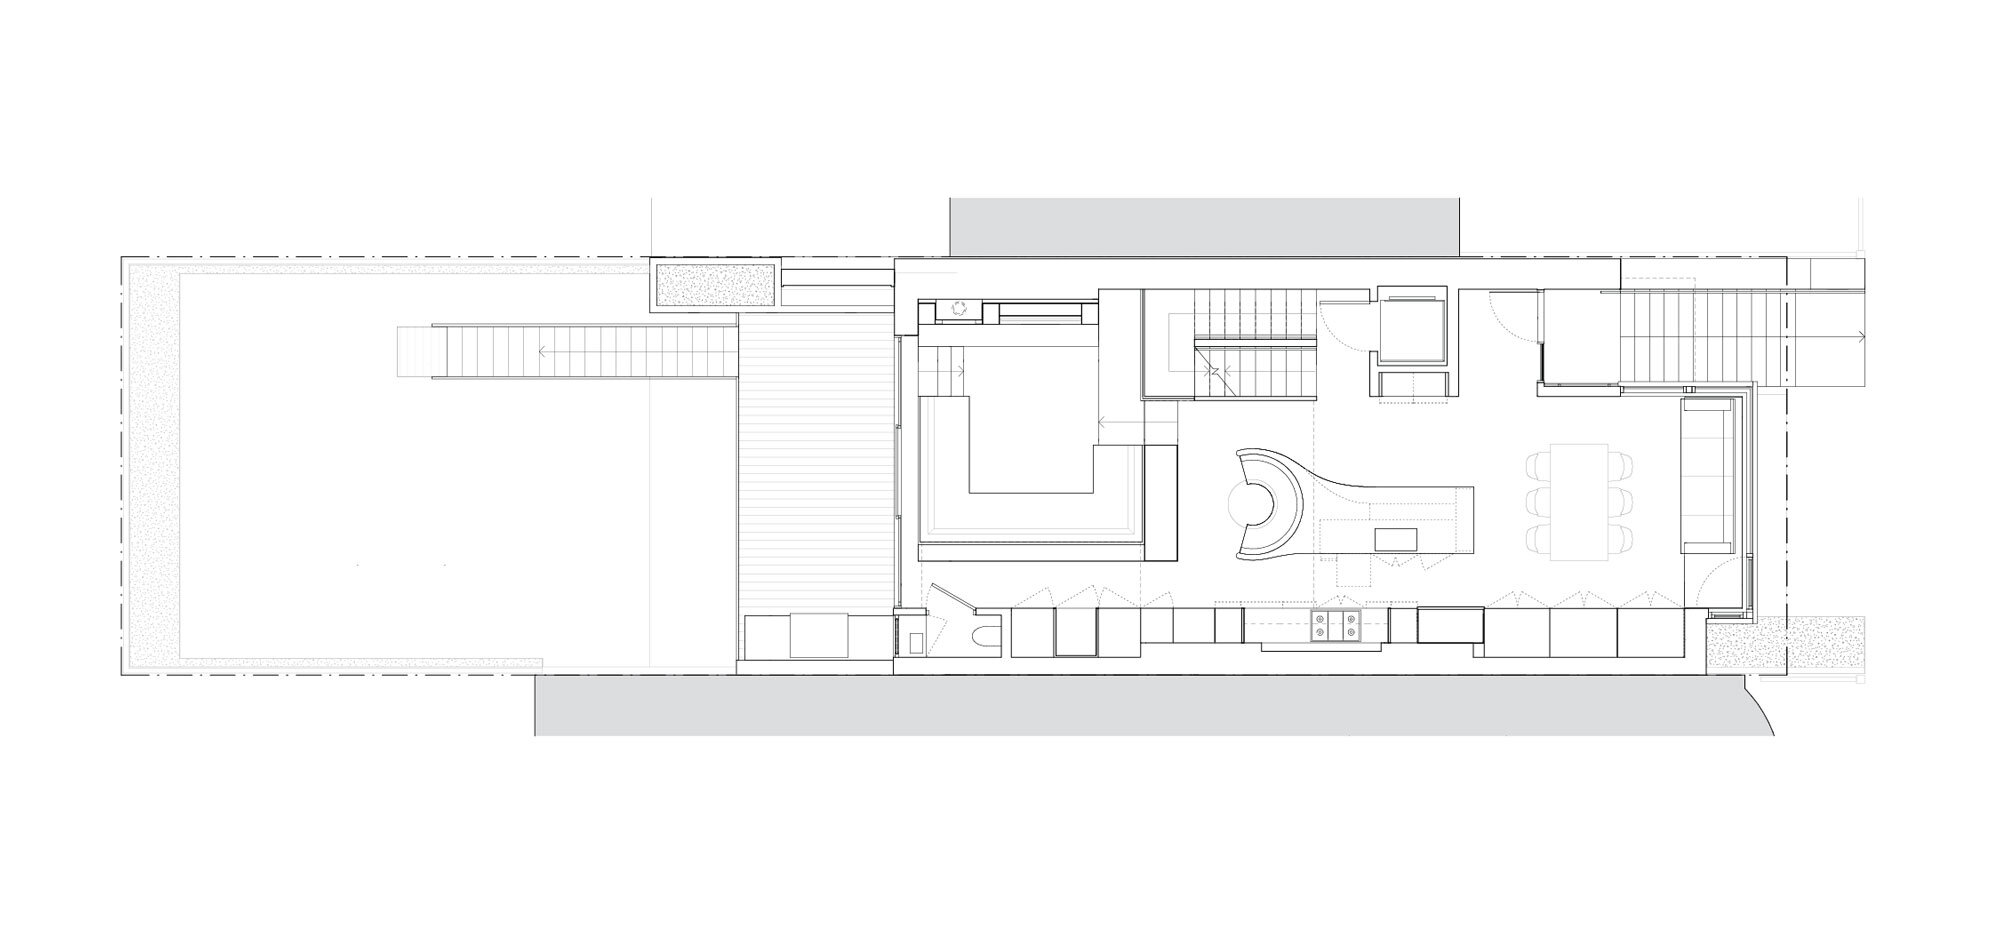 02-res4-re4a-resolution-4-architecture-park-slope-townhouse-brooklyn-modern-home-floor-plan.jpg